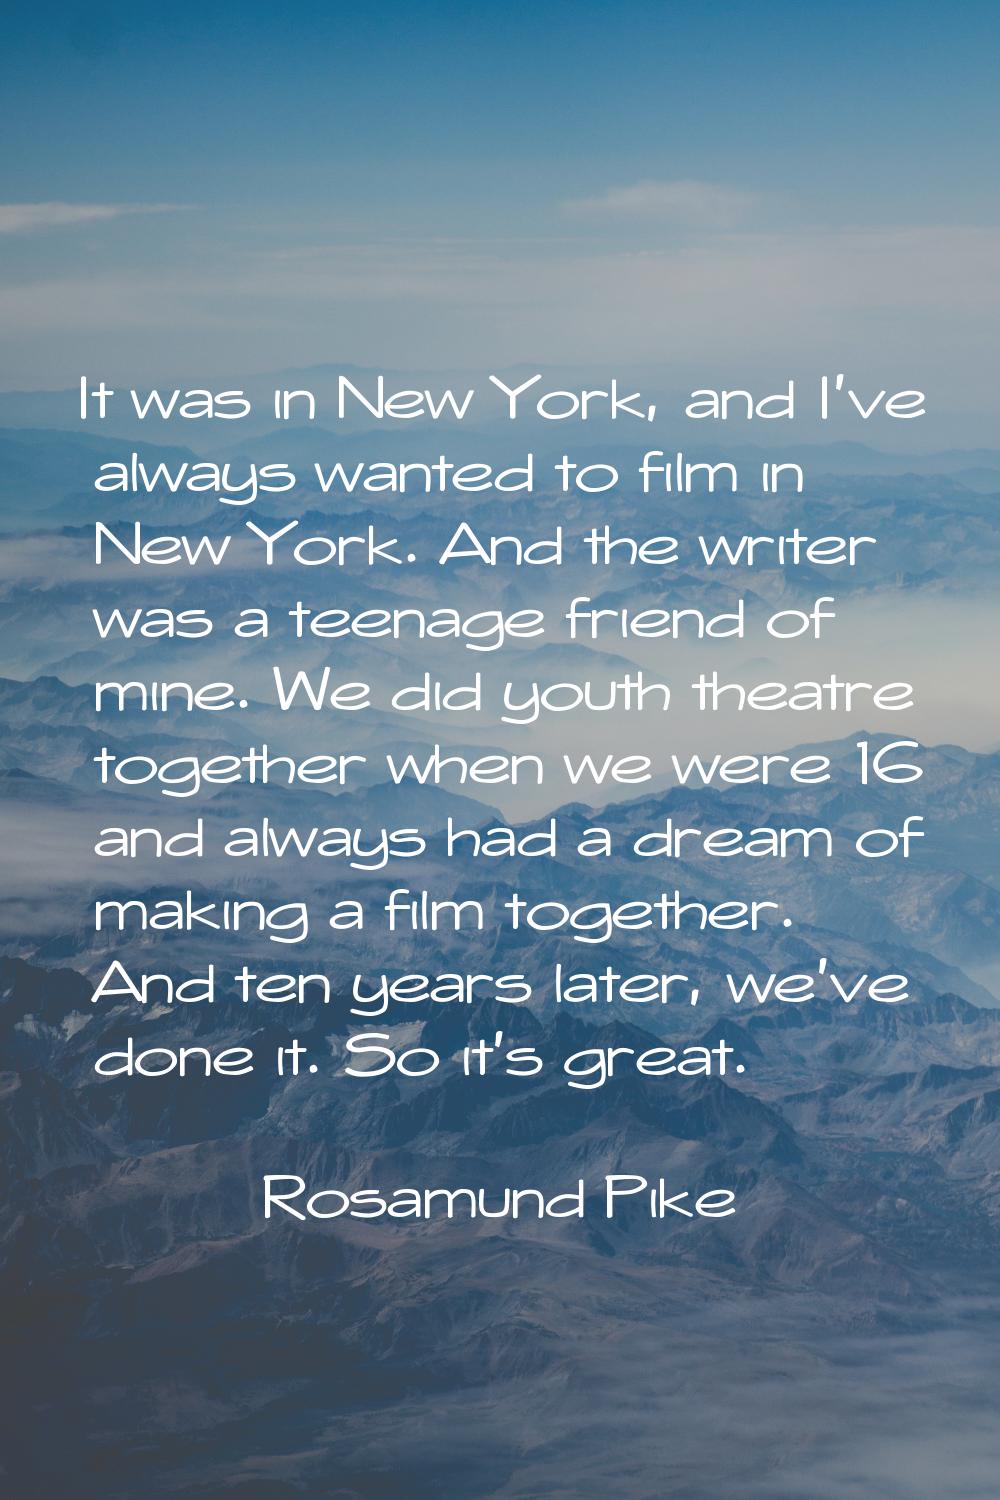 It was in New York, and I've always wanted to film in New York. And the writer was a teenage friend